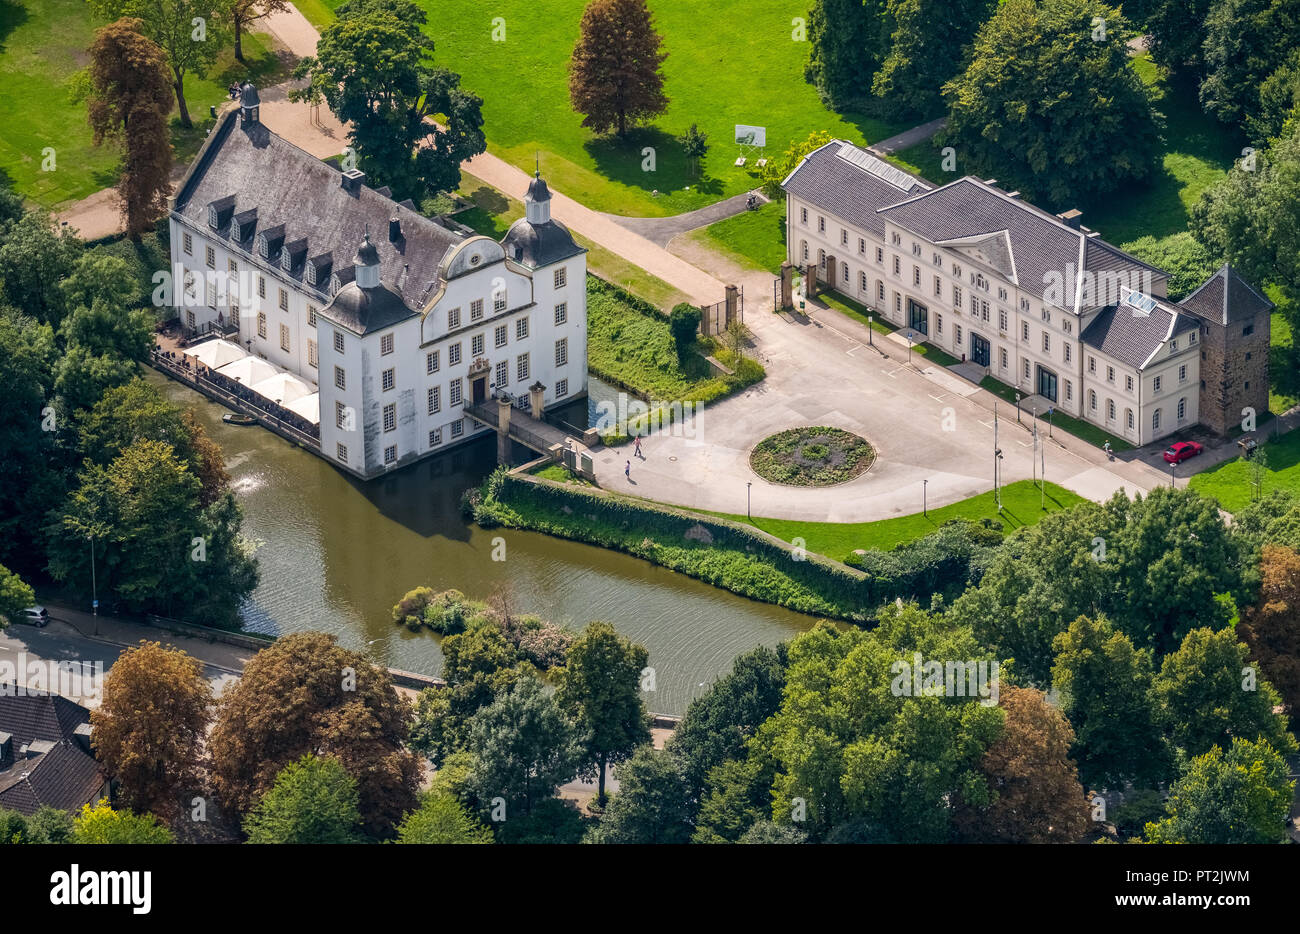 Borbeck Castle, Baroque moated castle, main building and an elongated farm building, curved gable, castle park is designed as an English landscape garden, Borbeck castle park, Theater Extra eV, Essen, Ruhr area, North Rhine-Westphalia, Germany Stock Photo